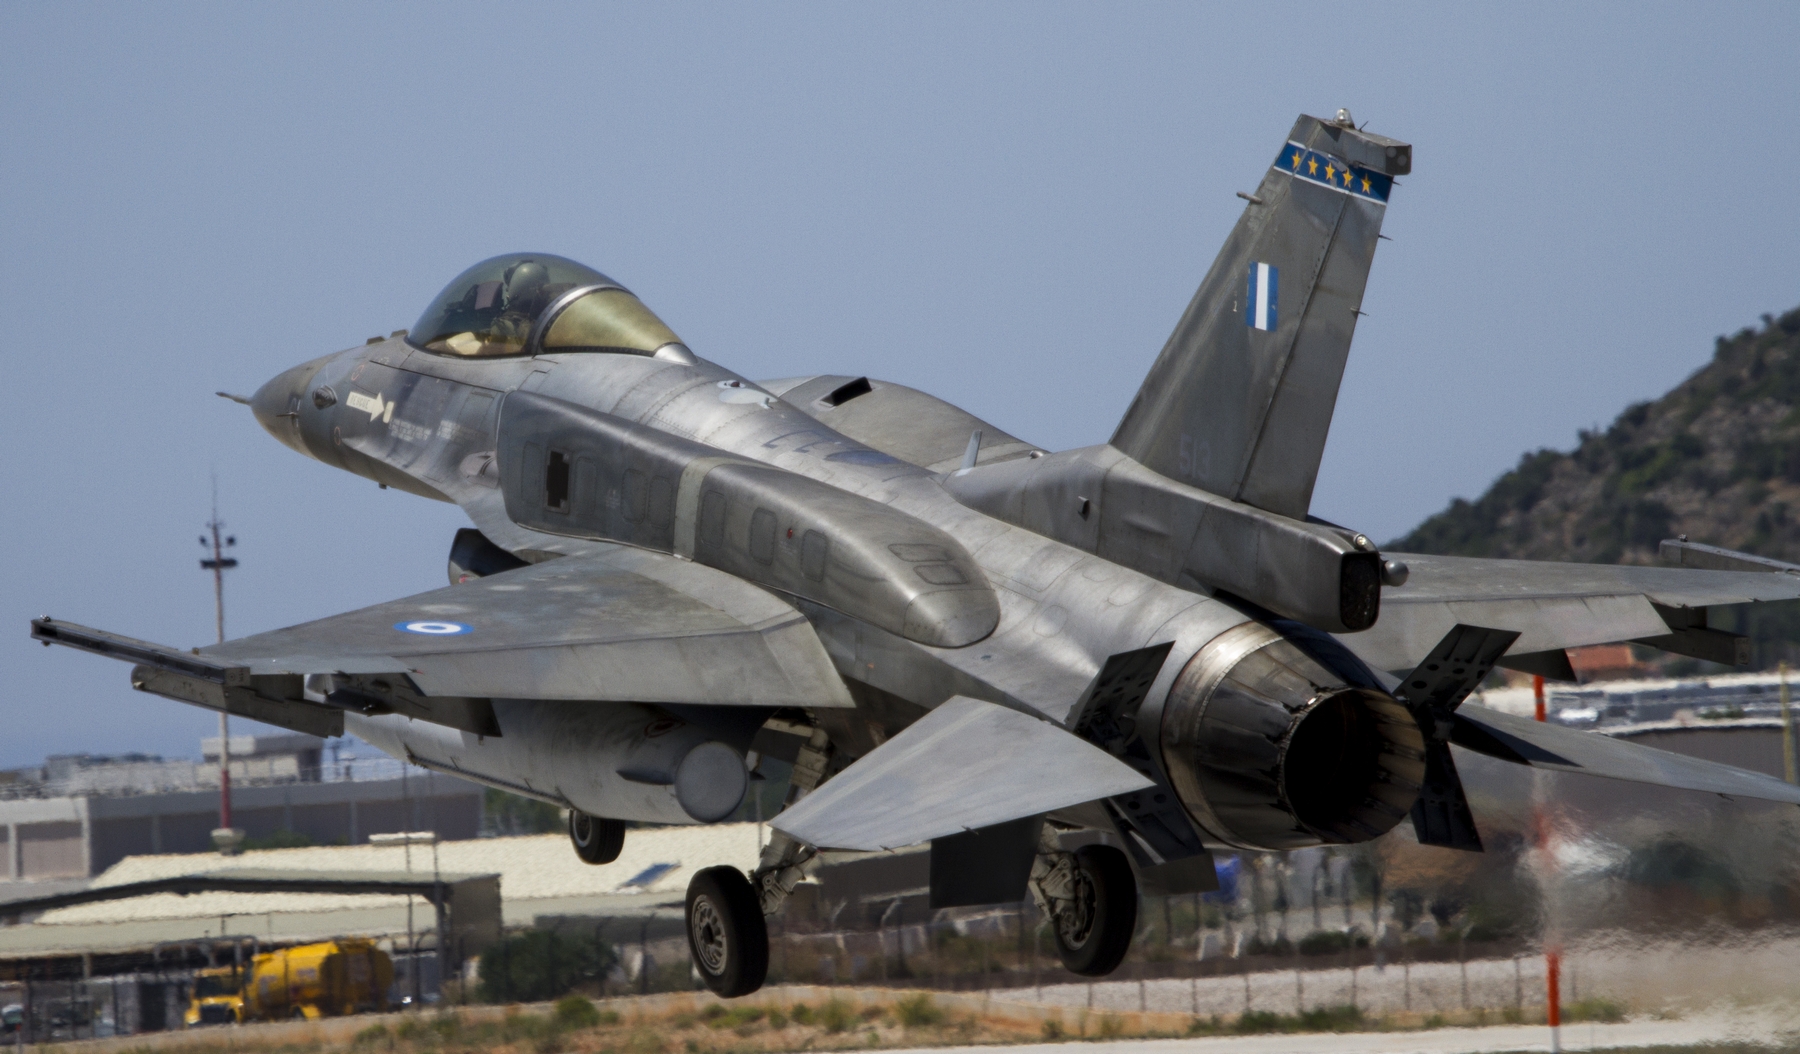 Hellenic Air Force 115 Combat Wing